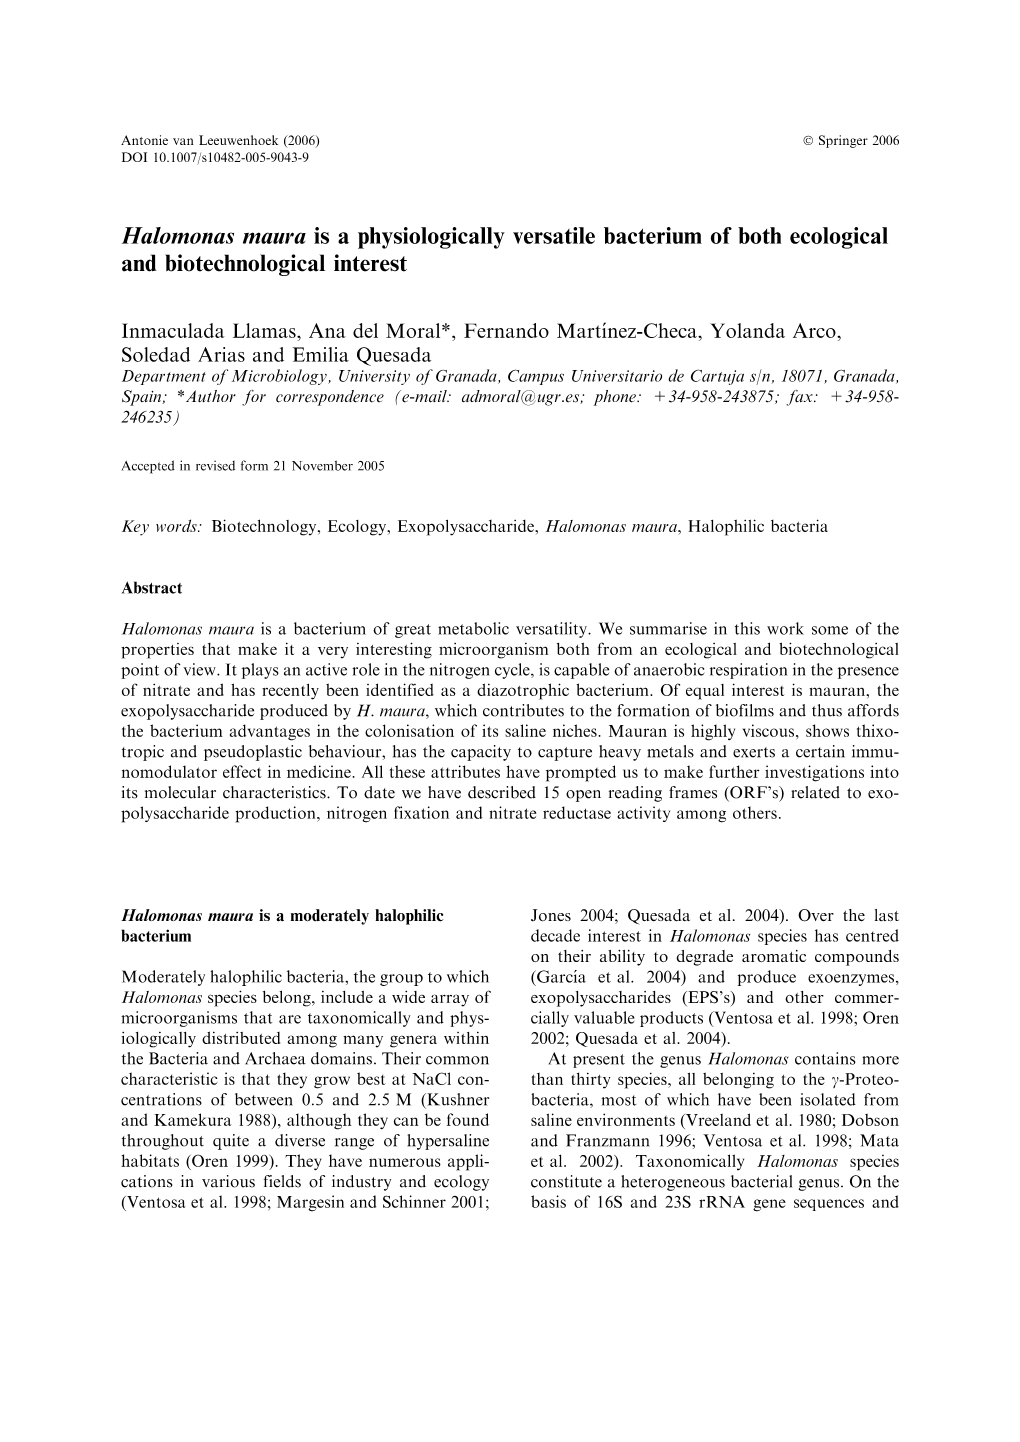 Halomonas Maura Is a Physiologically Versatile Bacterium of Both Ecological and Biotechnological Interest